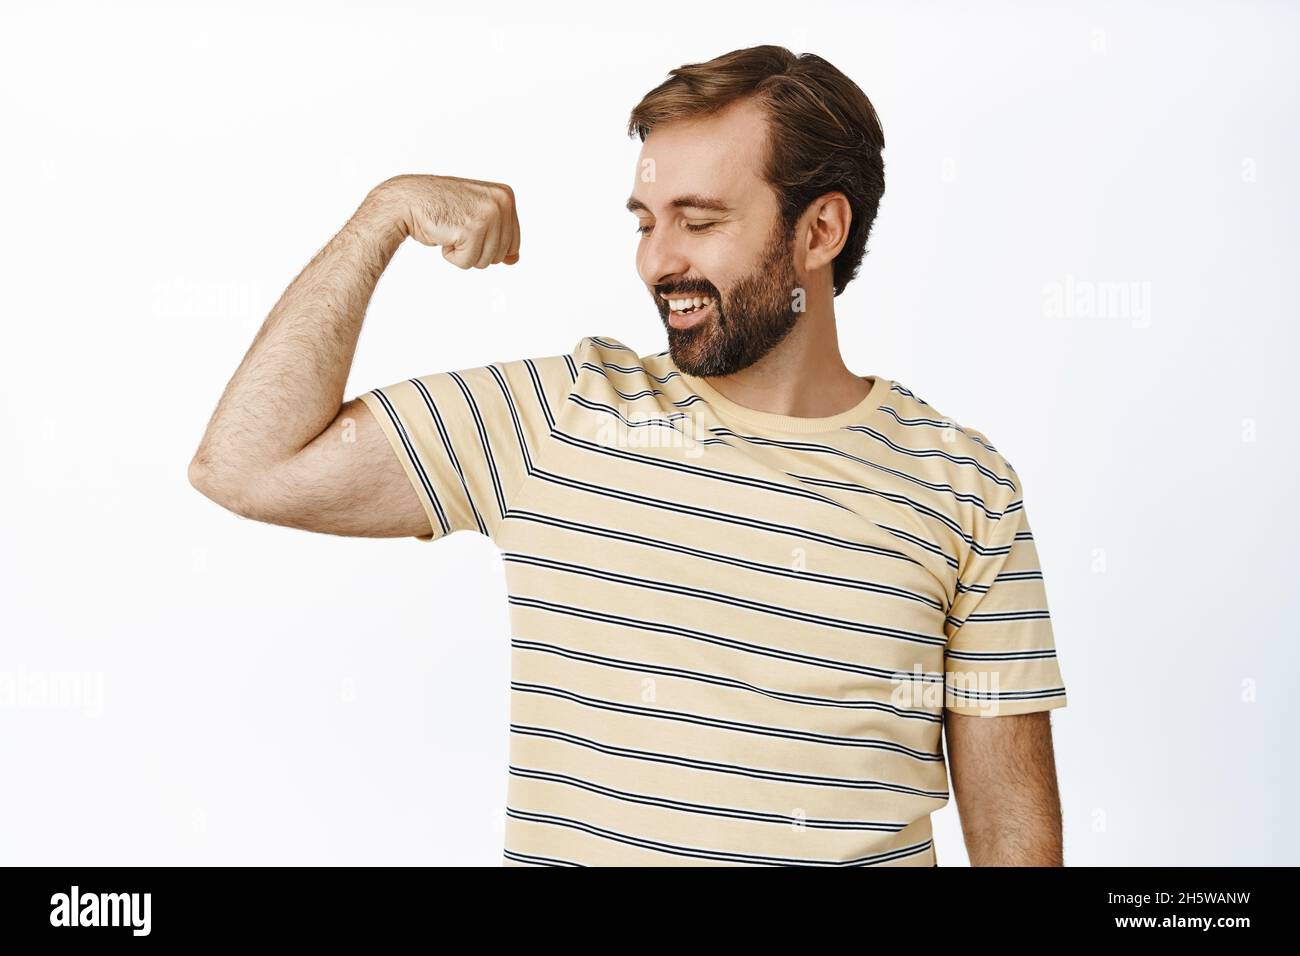 Portrait of smiling pleased man looking at his arm muscles, flexing biceps with satisfied face expression. Concept of workout and gym membership Stock Photo